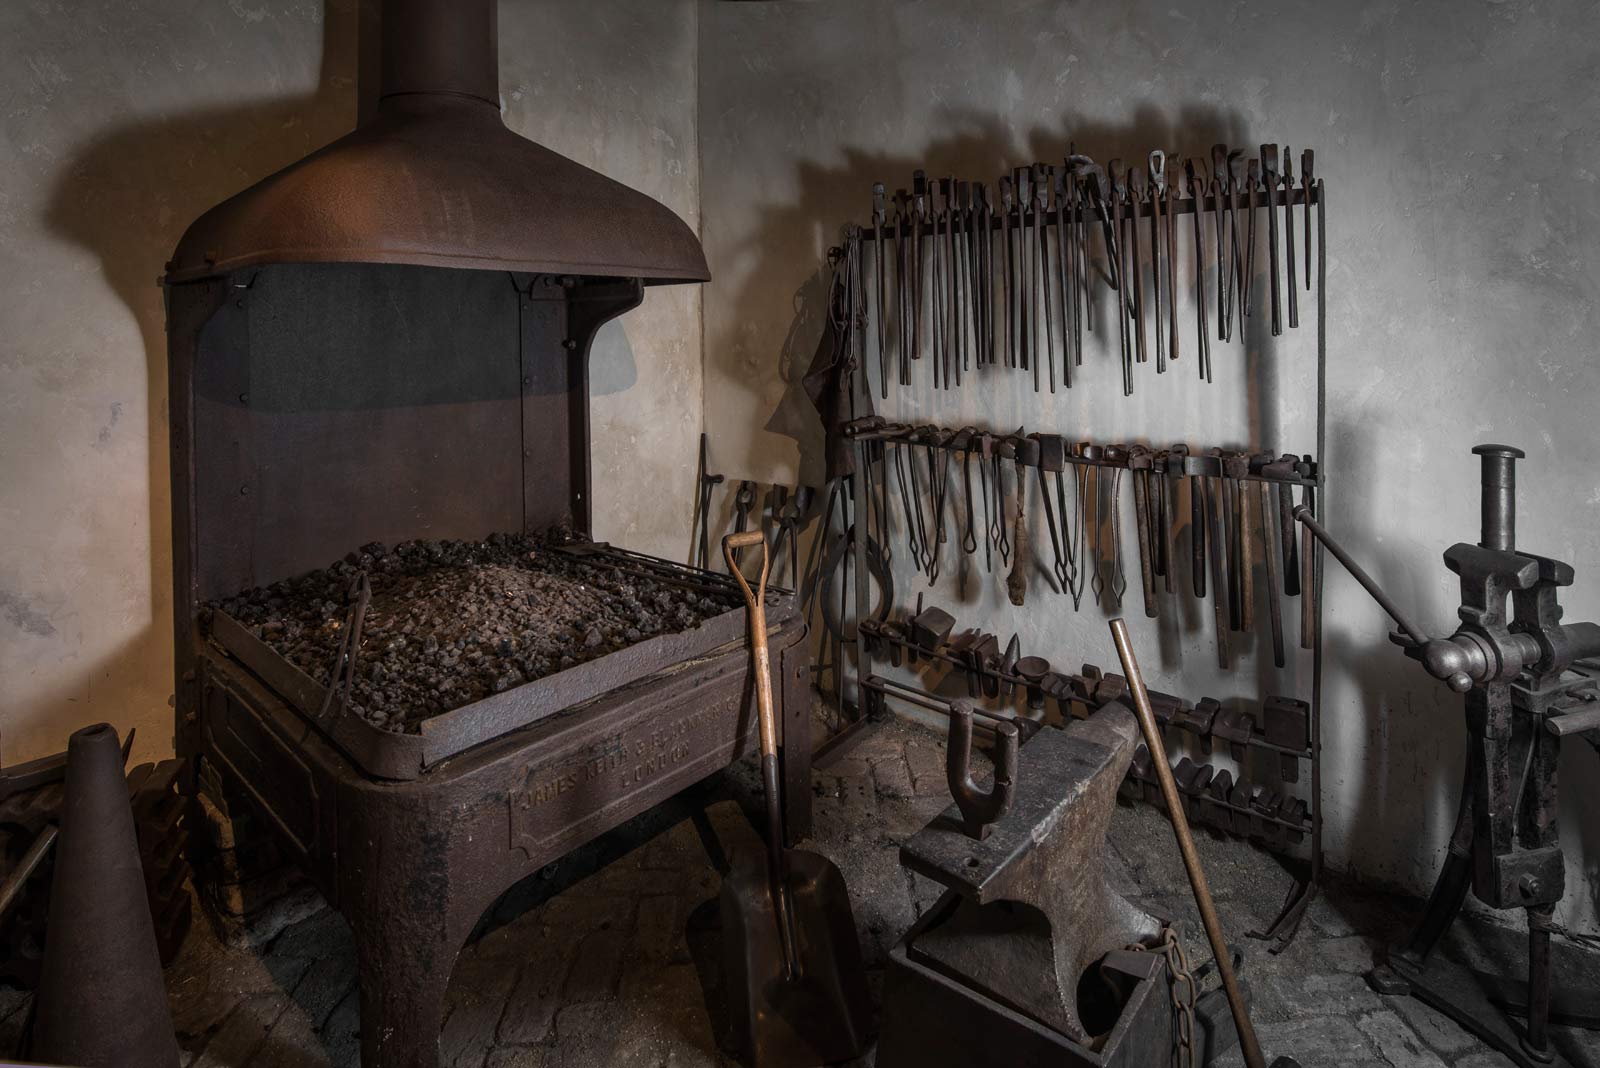 Recreation of a blacksmith's forge used to make parts for ships and warehouses in the Port of London.